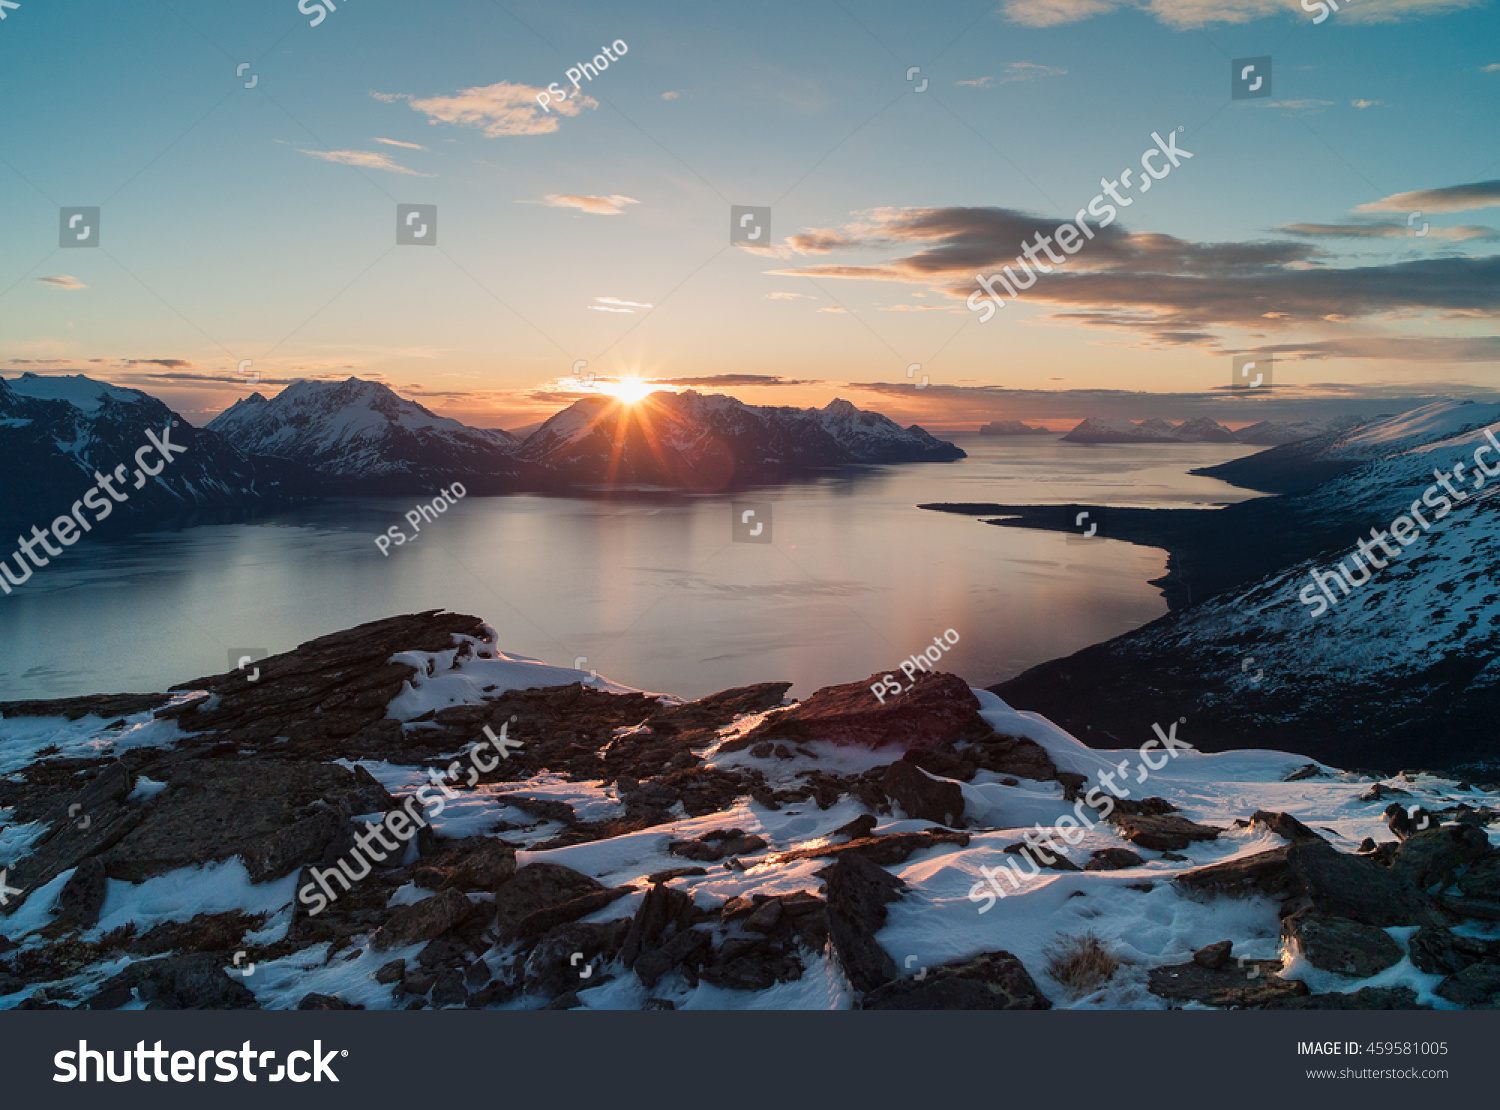 Midnight sun over Lyngen and Kafjord. 
North / Arctic Norway #459581005